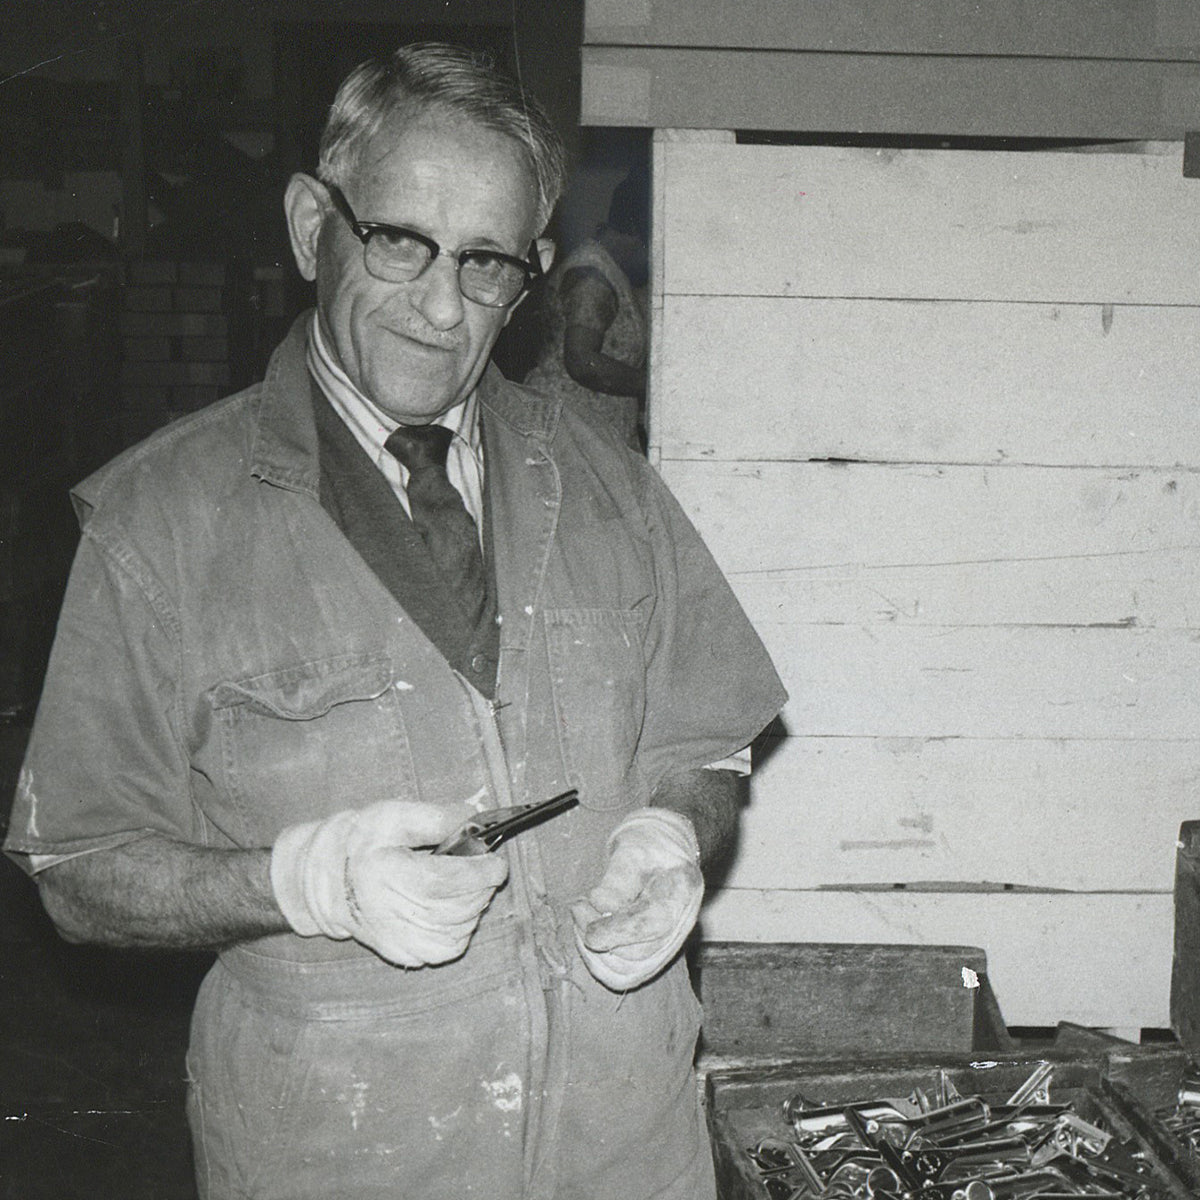 Founder and Owner of Ettore Products, Ettore Steccone